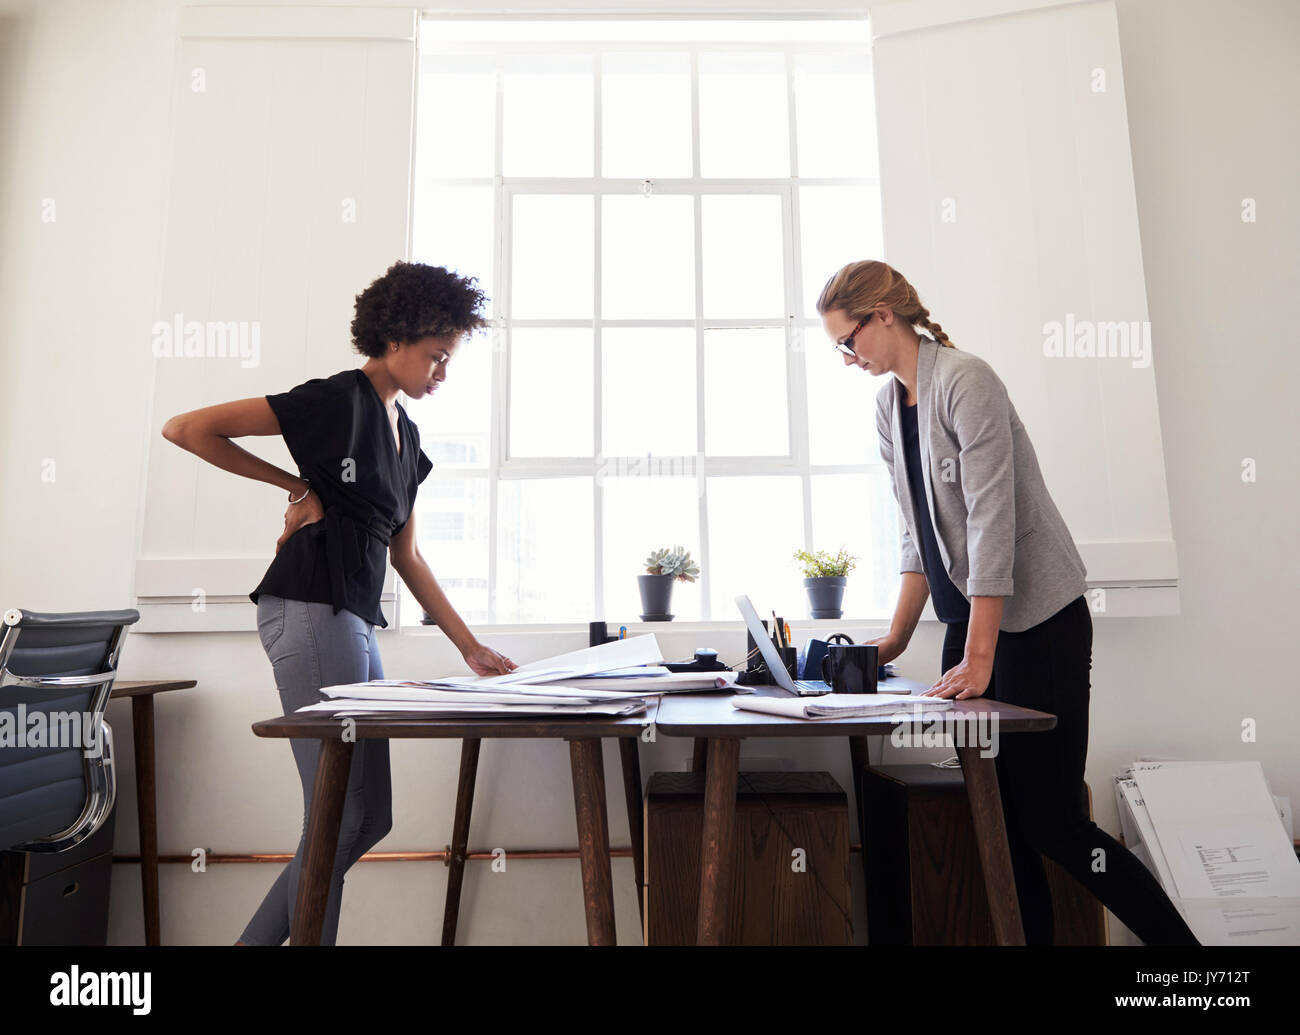 Two women stand working at opposite sides of an office desk Stock Photo